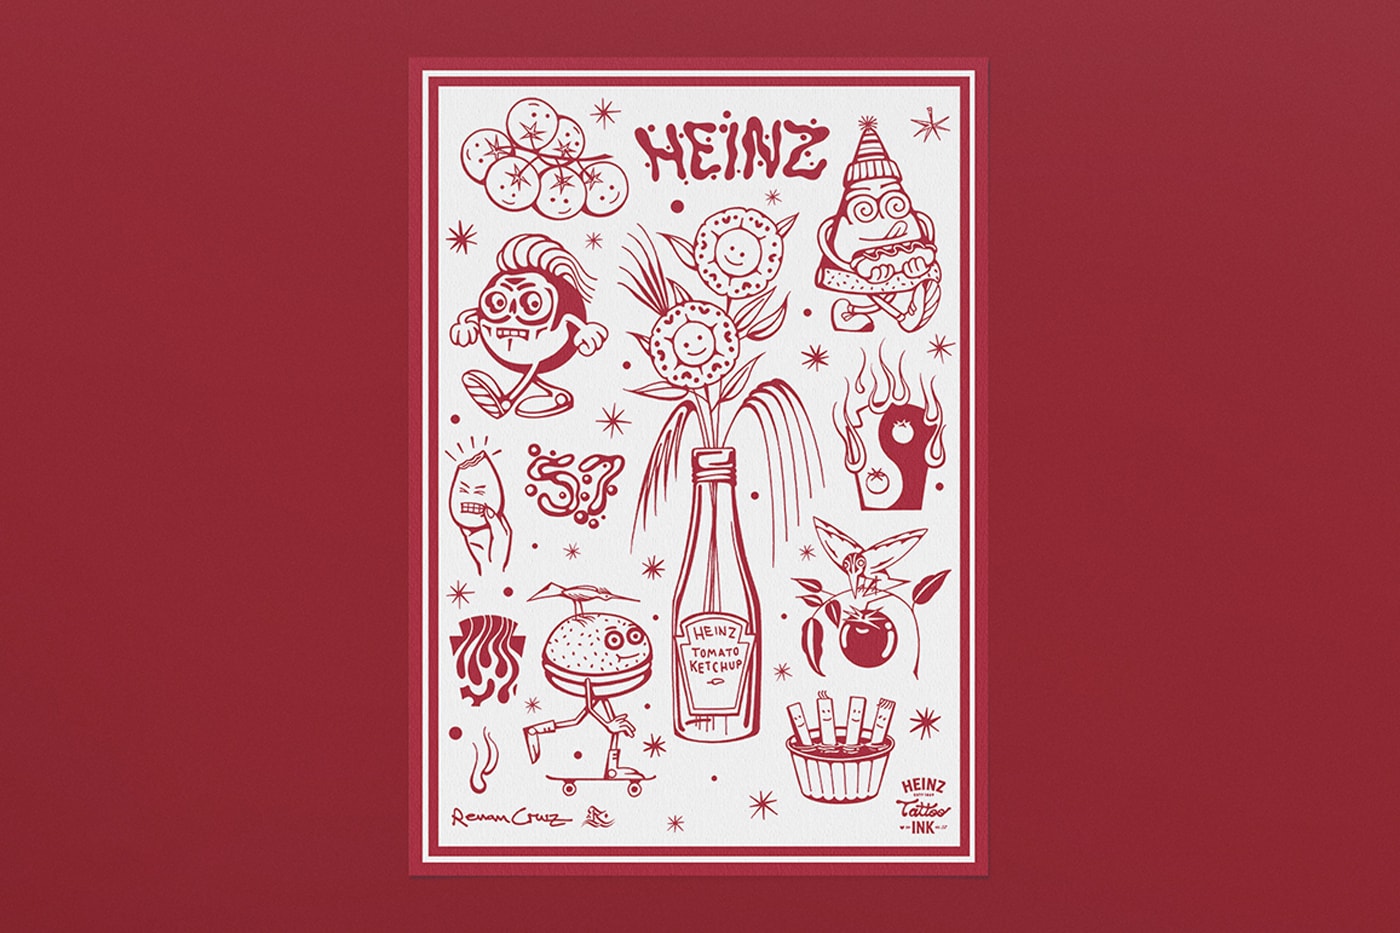 Heinz Red Tattoo Ink pigment ketchup soko electric ink non harmful ingredients news info 